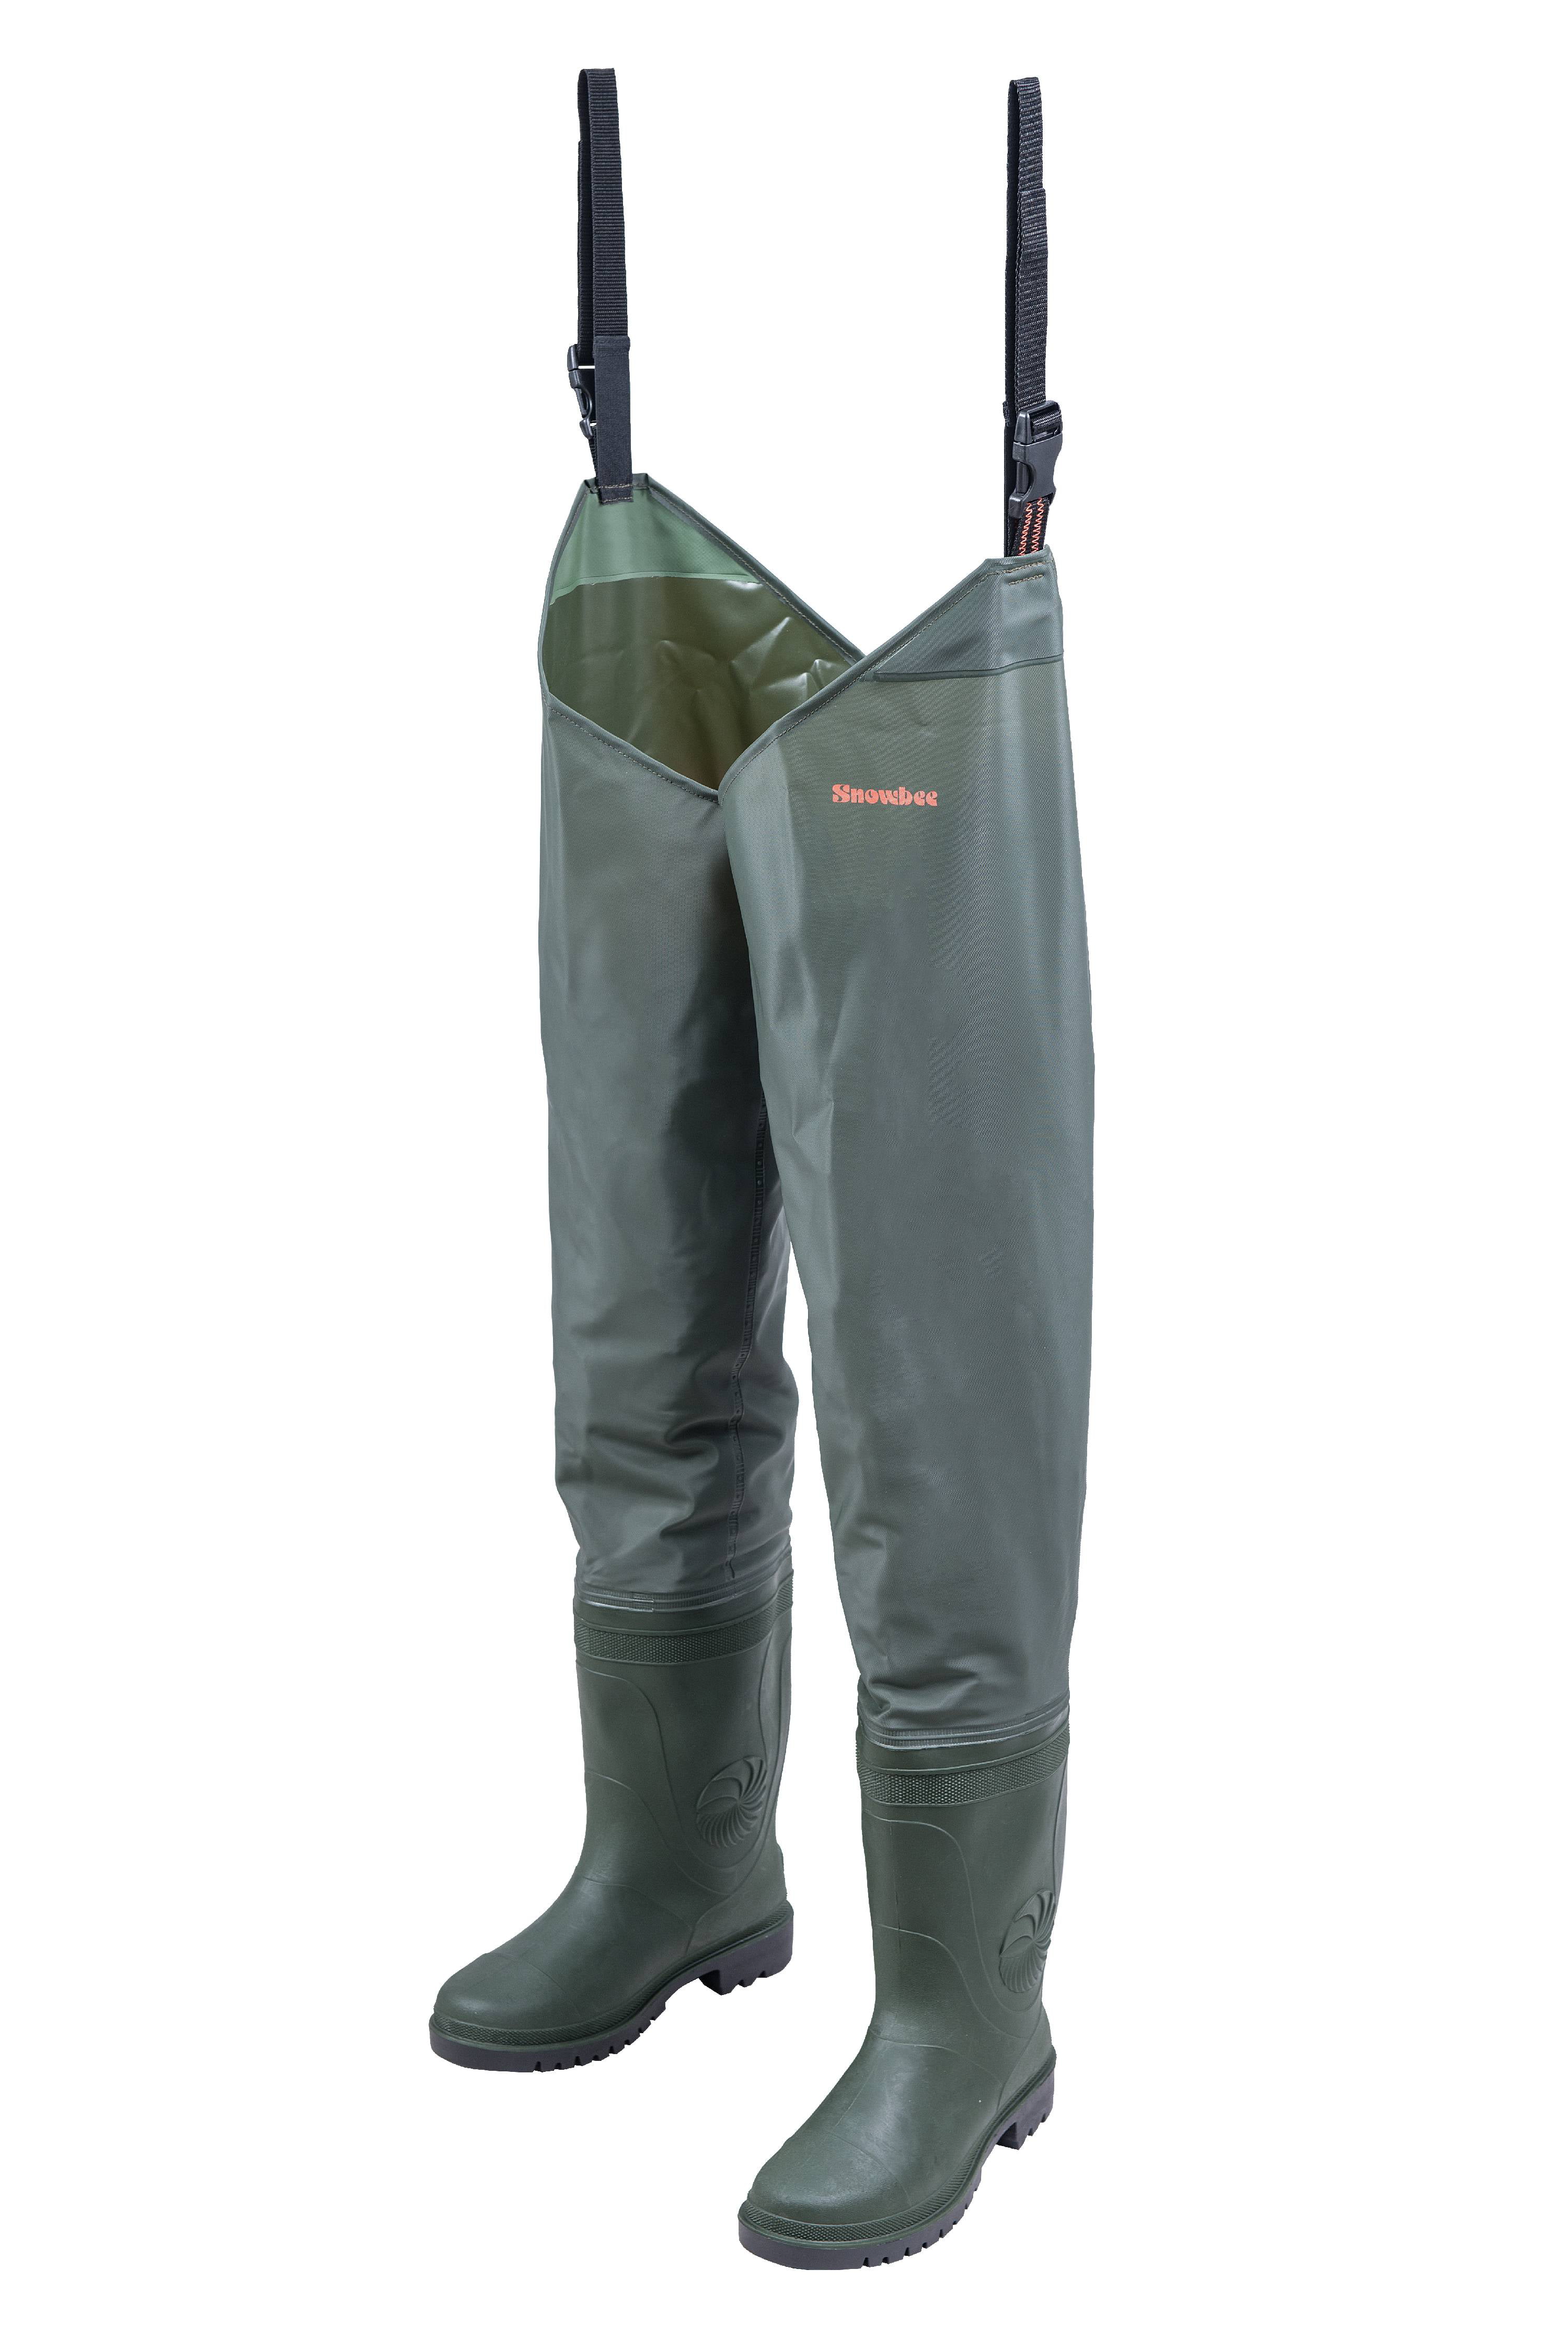 Snowbee Heavy Duty GRANITE PVC Chest Waders & Thigh Waders with cleated sole 